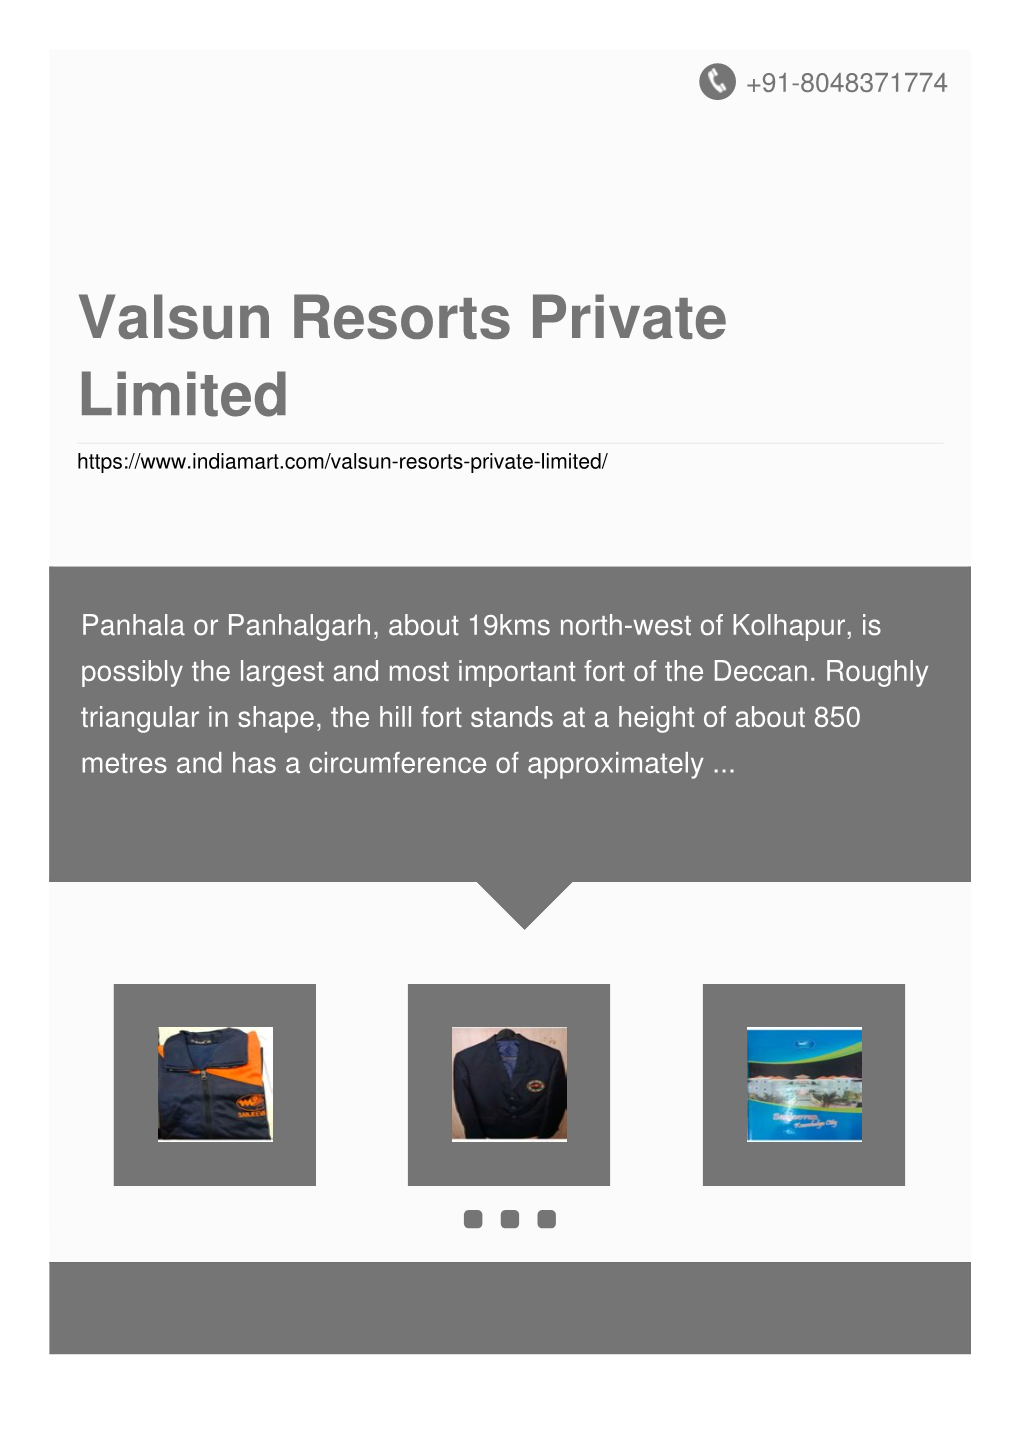 Valsun Resorts Private Limited